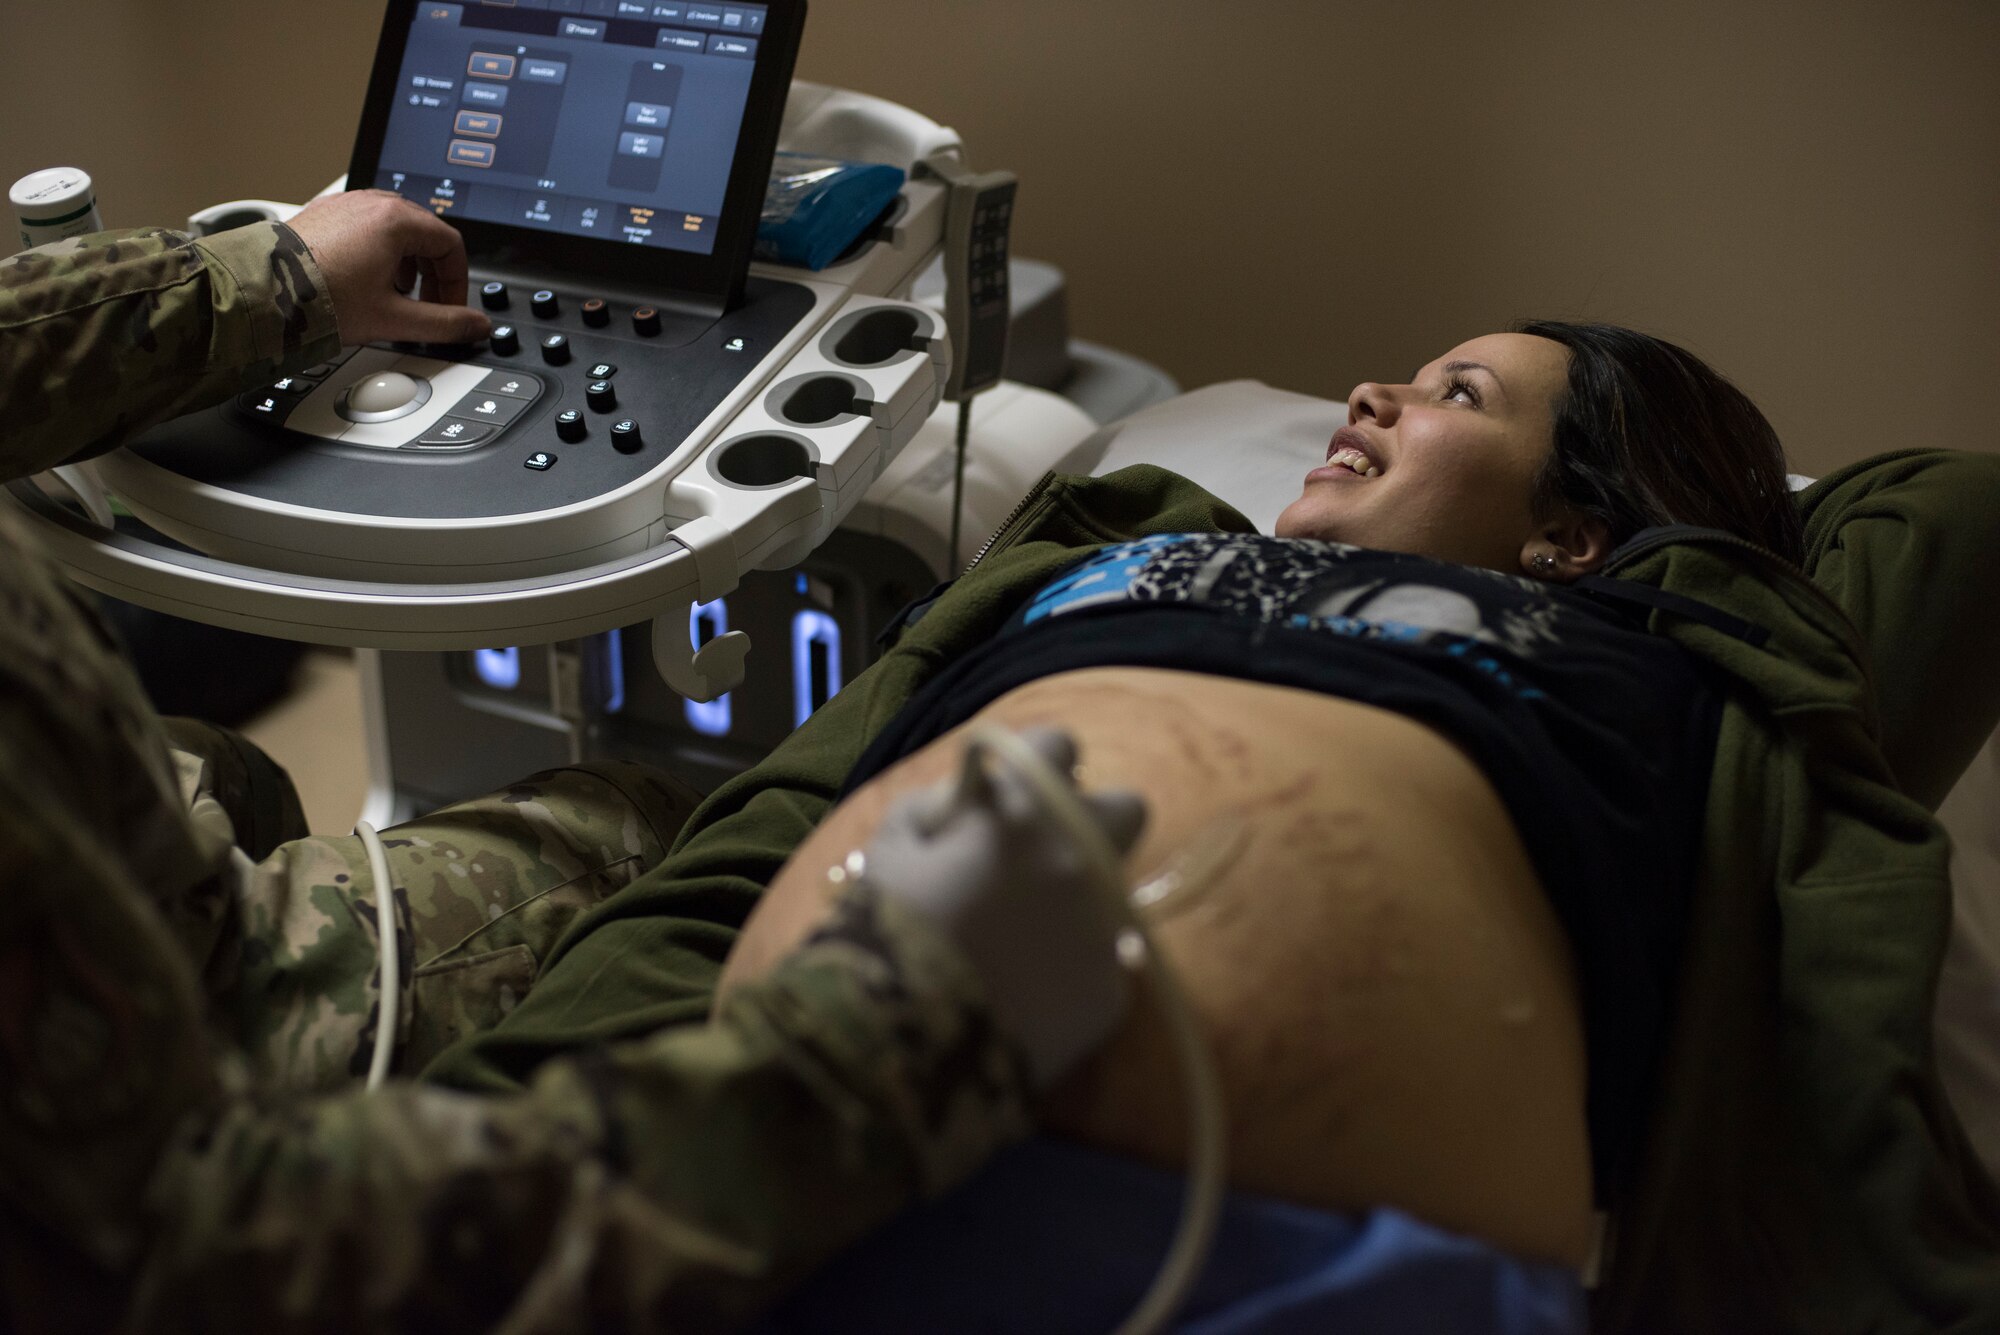 U.S. Air Force Staff Sgt. Nance Pea, the 35th Surgical Operations Squadron ultrasound NCO in charge, performs an ultrasound on Annalisa McCormick, spouse of Airman 1st Class Kristopher McCormick, a 35th Civil Engineer Squadron pavement and equipment journeyman, at Misawa Air Base, Japan, April 10, 2019. This procedure uses sound waves to show pictures of a baby in the womb, allowing health care providers to monitor a baby’s health and development. (U.S. Air Force photo by Senior Airman Collette Brooks)